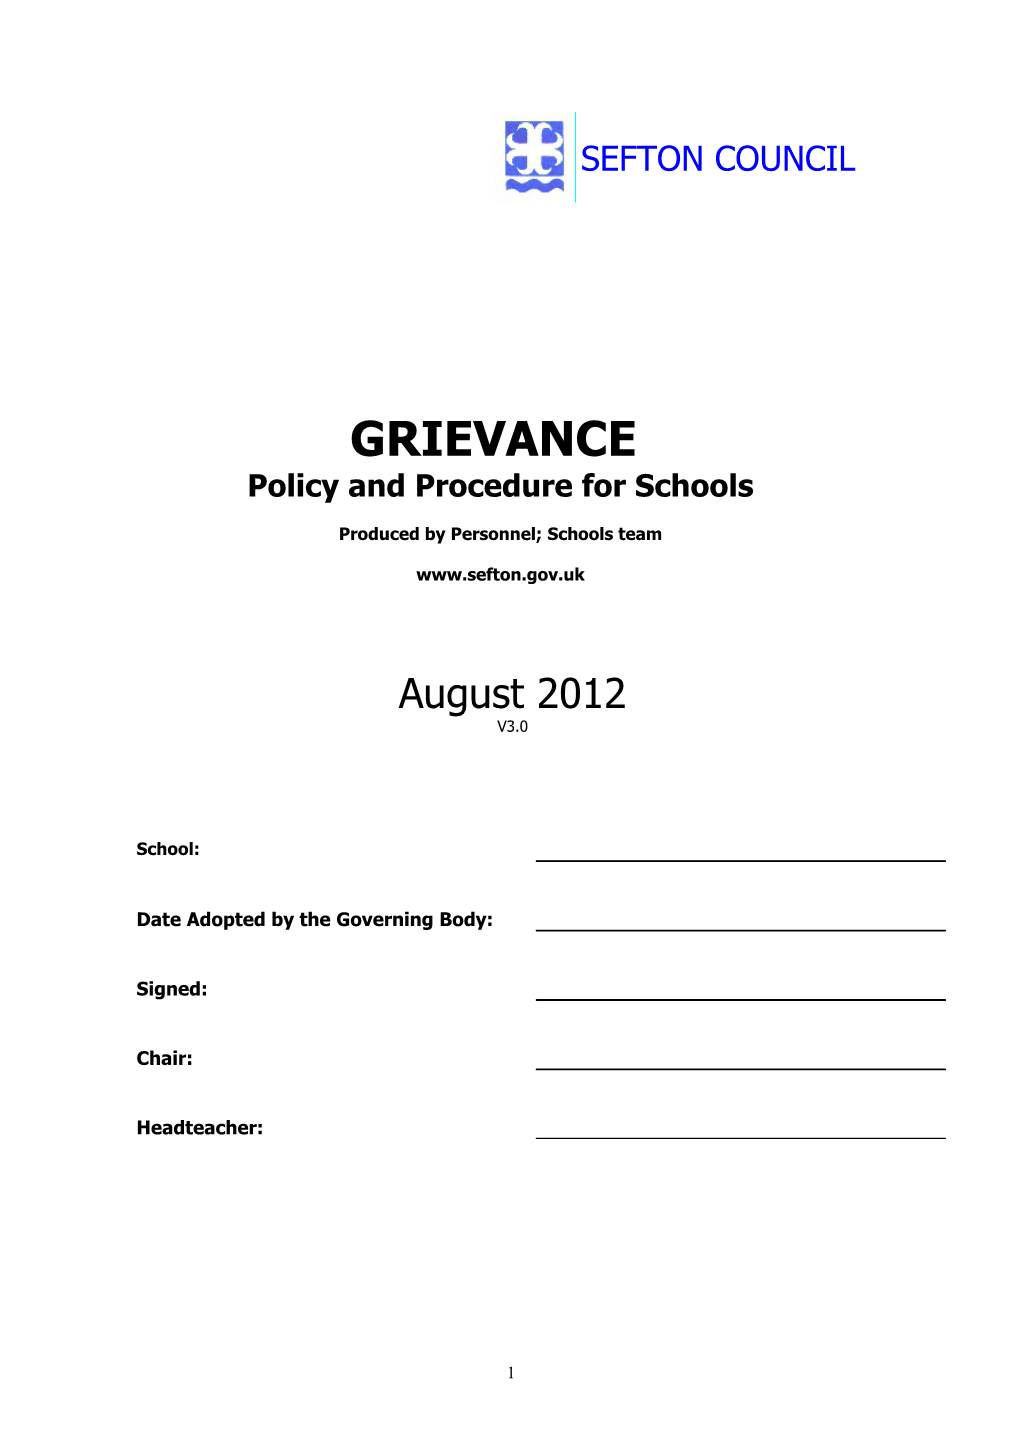 Example of a School Grievance Policy and Procedures